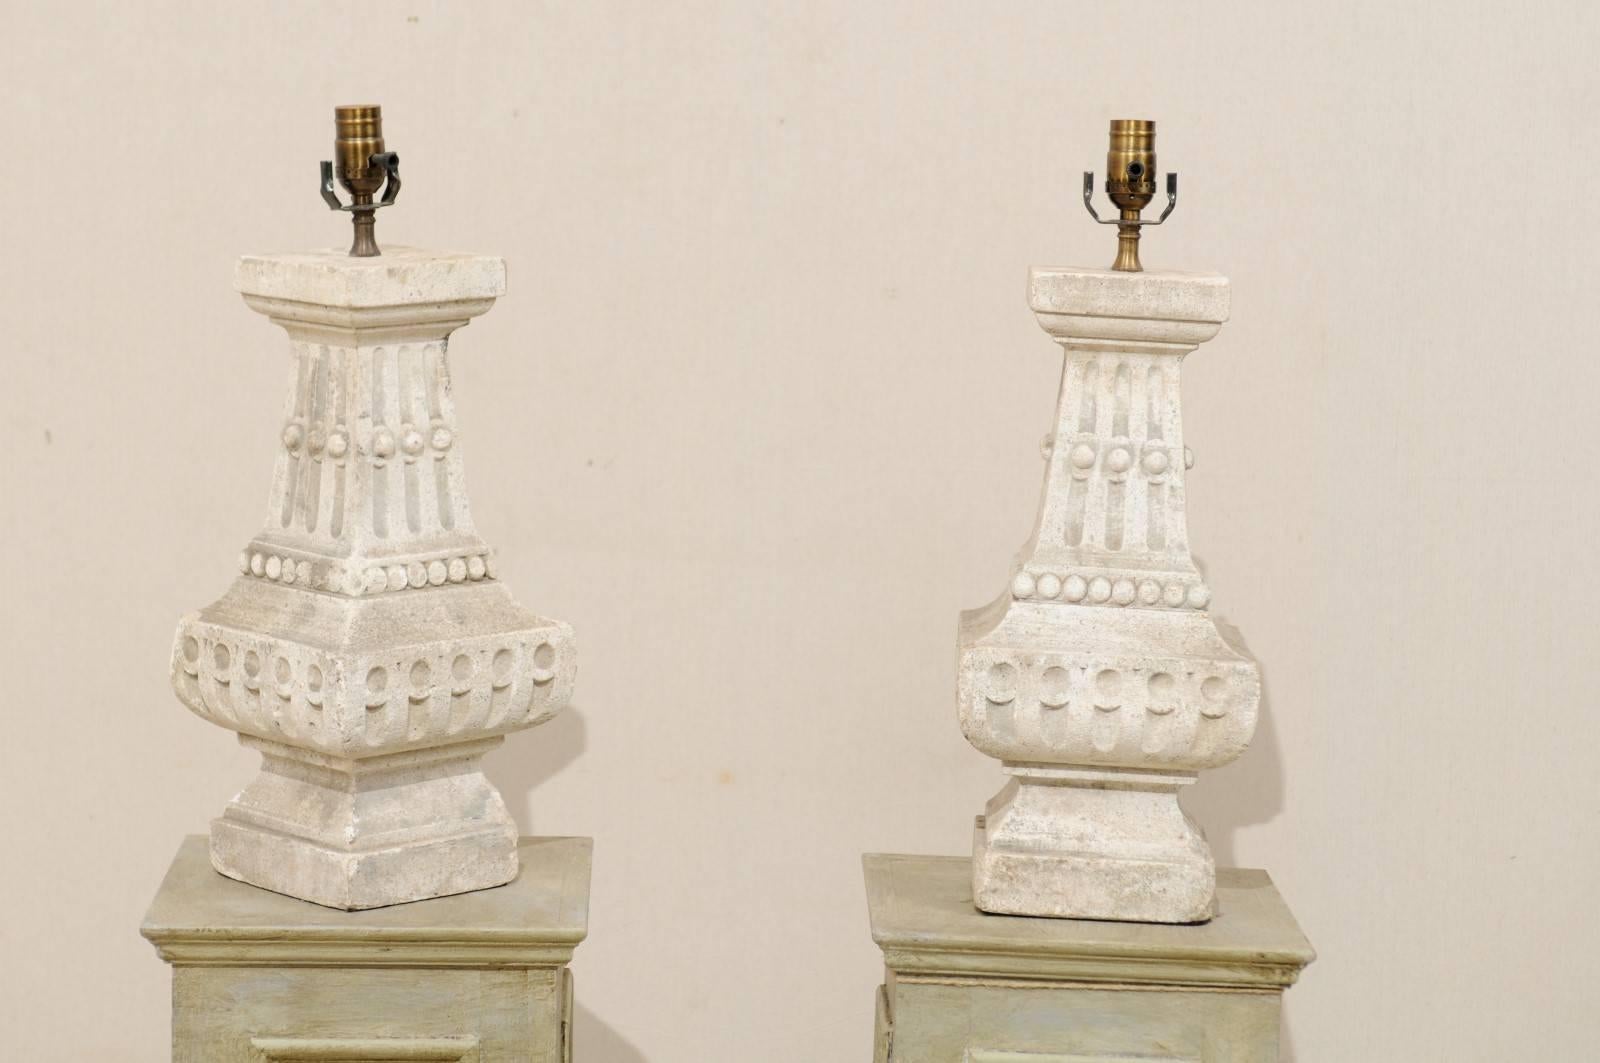 A pair of French cast stone table lamps. These pair of French table lamps from the mid to late 20th century has an elegant cast stone baluster form, and beautifully-weathered surface. The lamps are adorned with a series of convex and concave